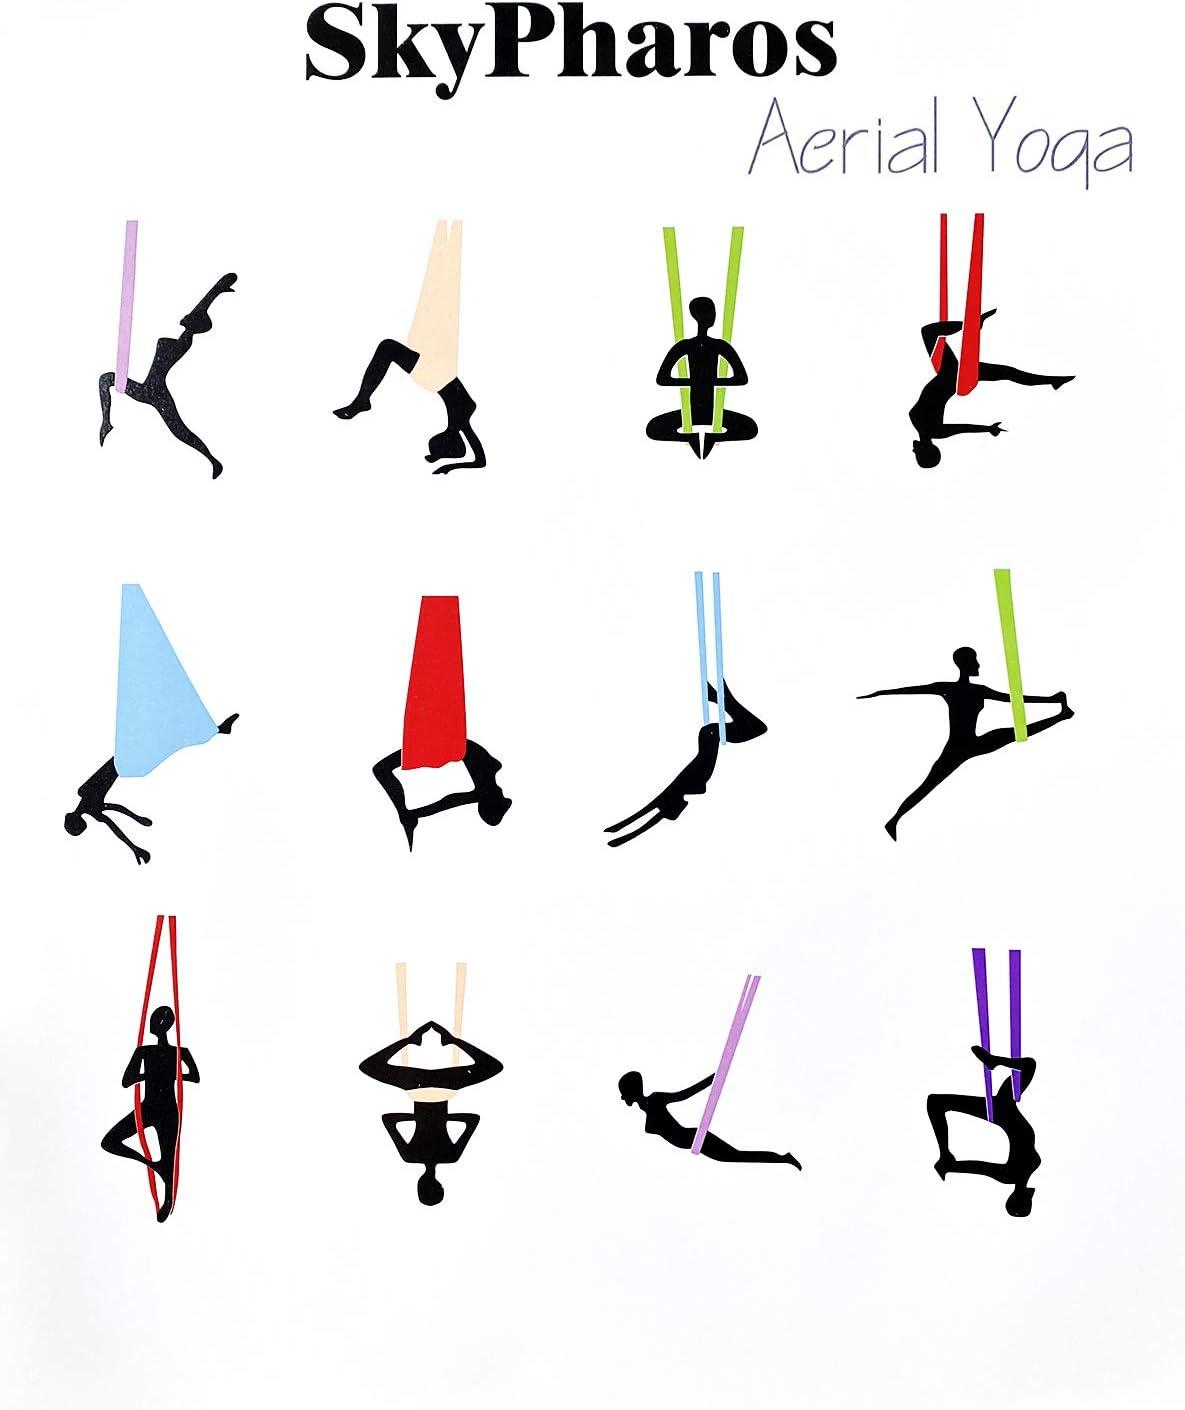 Amazon.in: Buy The Quick Guide to Aerial Yoga Poses Book Online at Low  Prices in India | The Quick Guide to Aerial Yoga Poses Reviews & Ratings